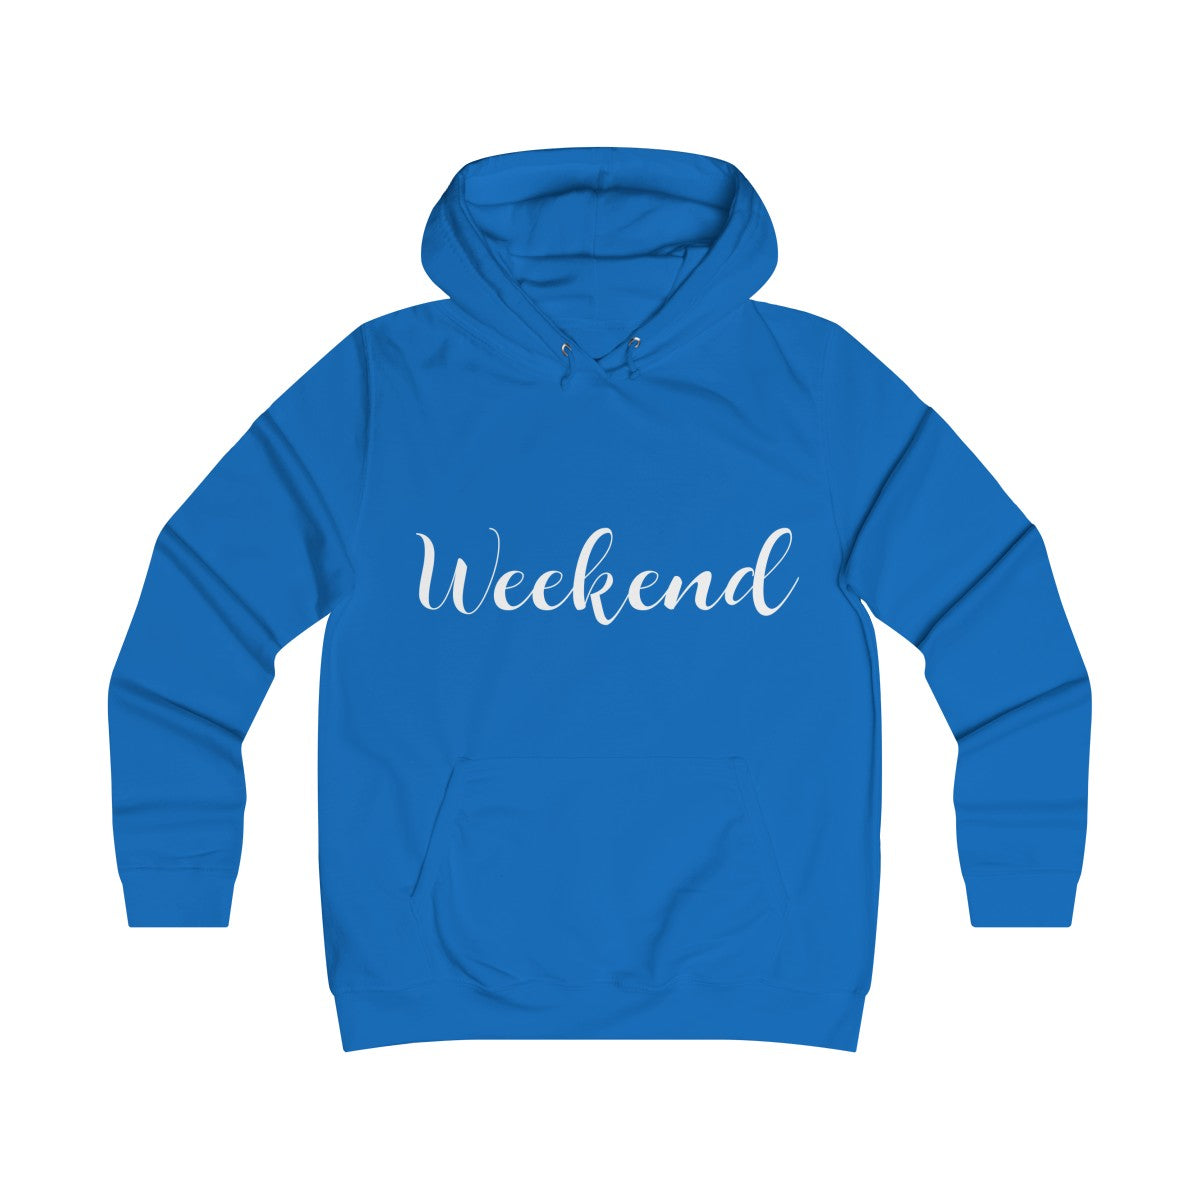 COMFY WEEKEND HOODIE available in many color options!